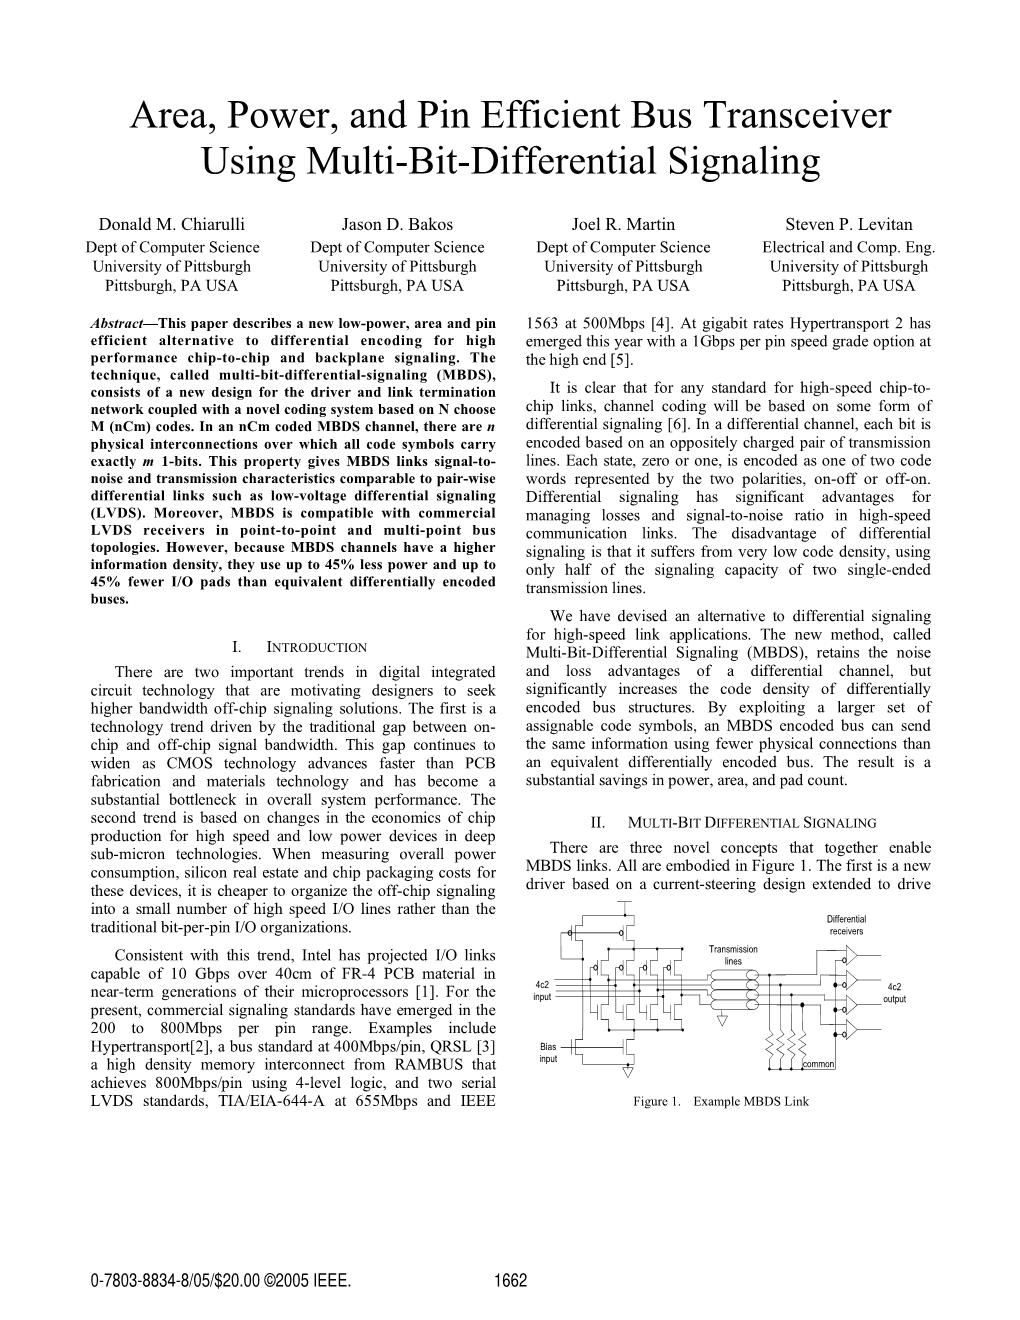 Area, Power, and Pin Efficient Bus Transceiver Using Multi-Bit-Differential Signaling